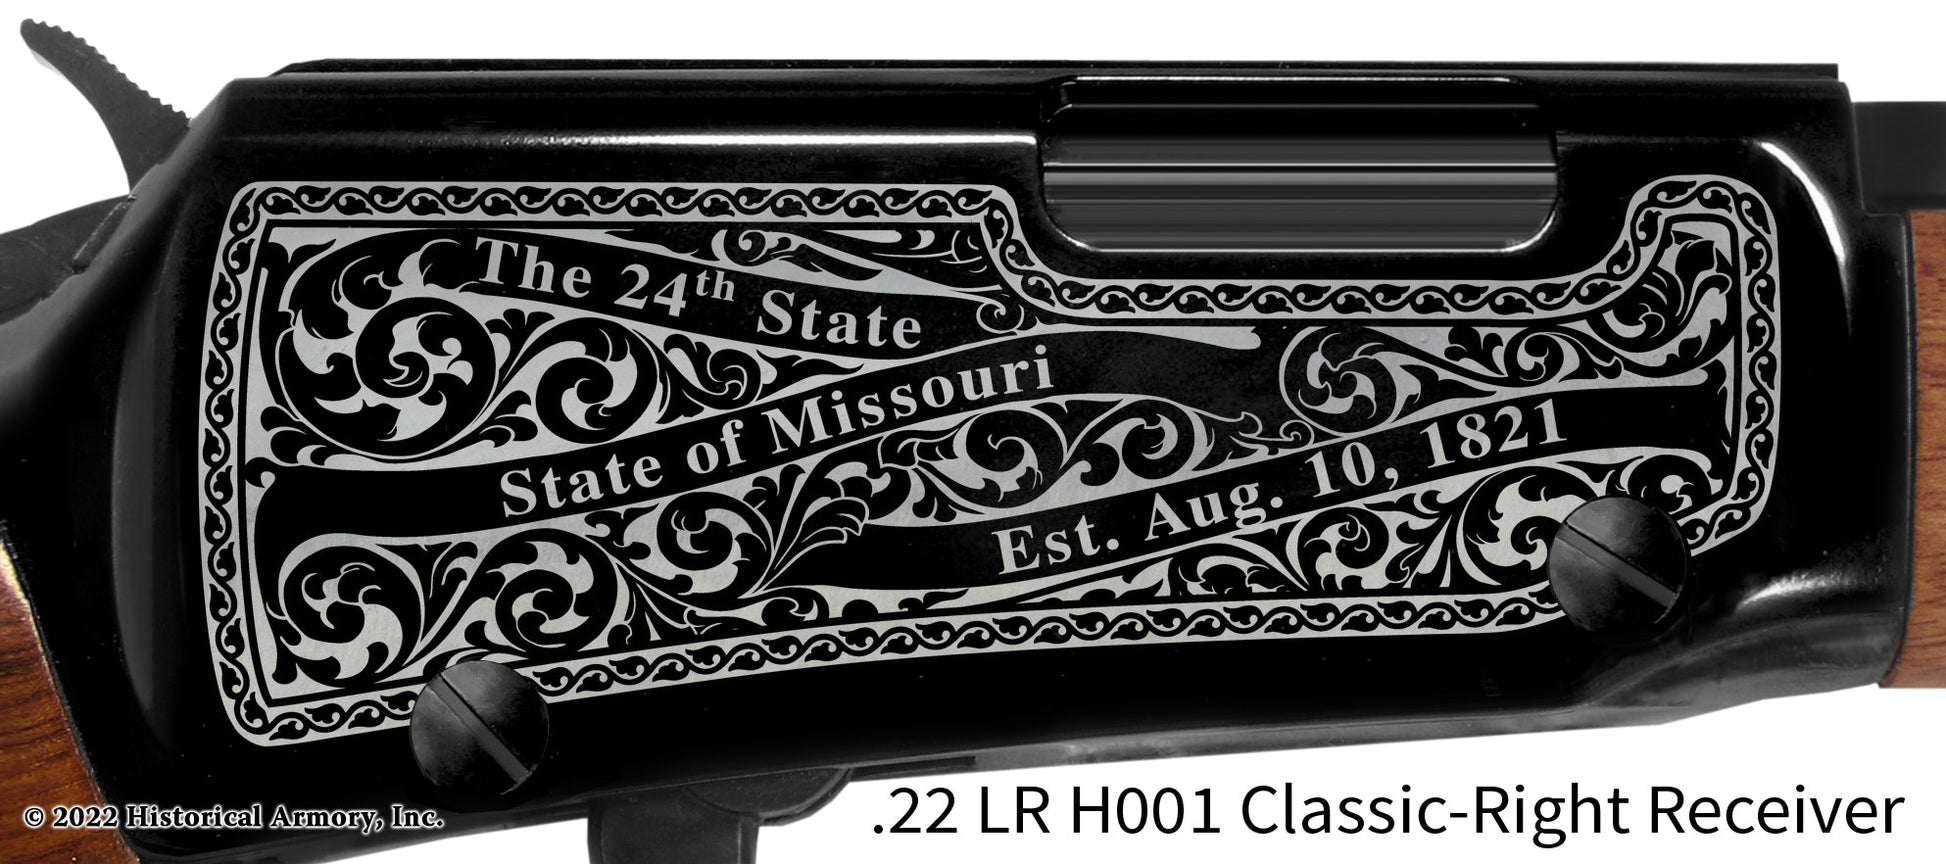 Barry County Missouri Engraved Henry H001 Rifle